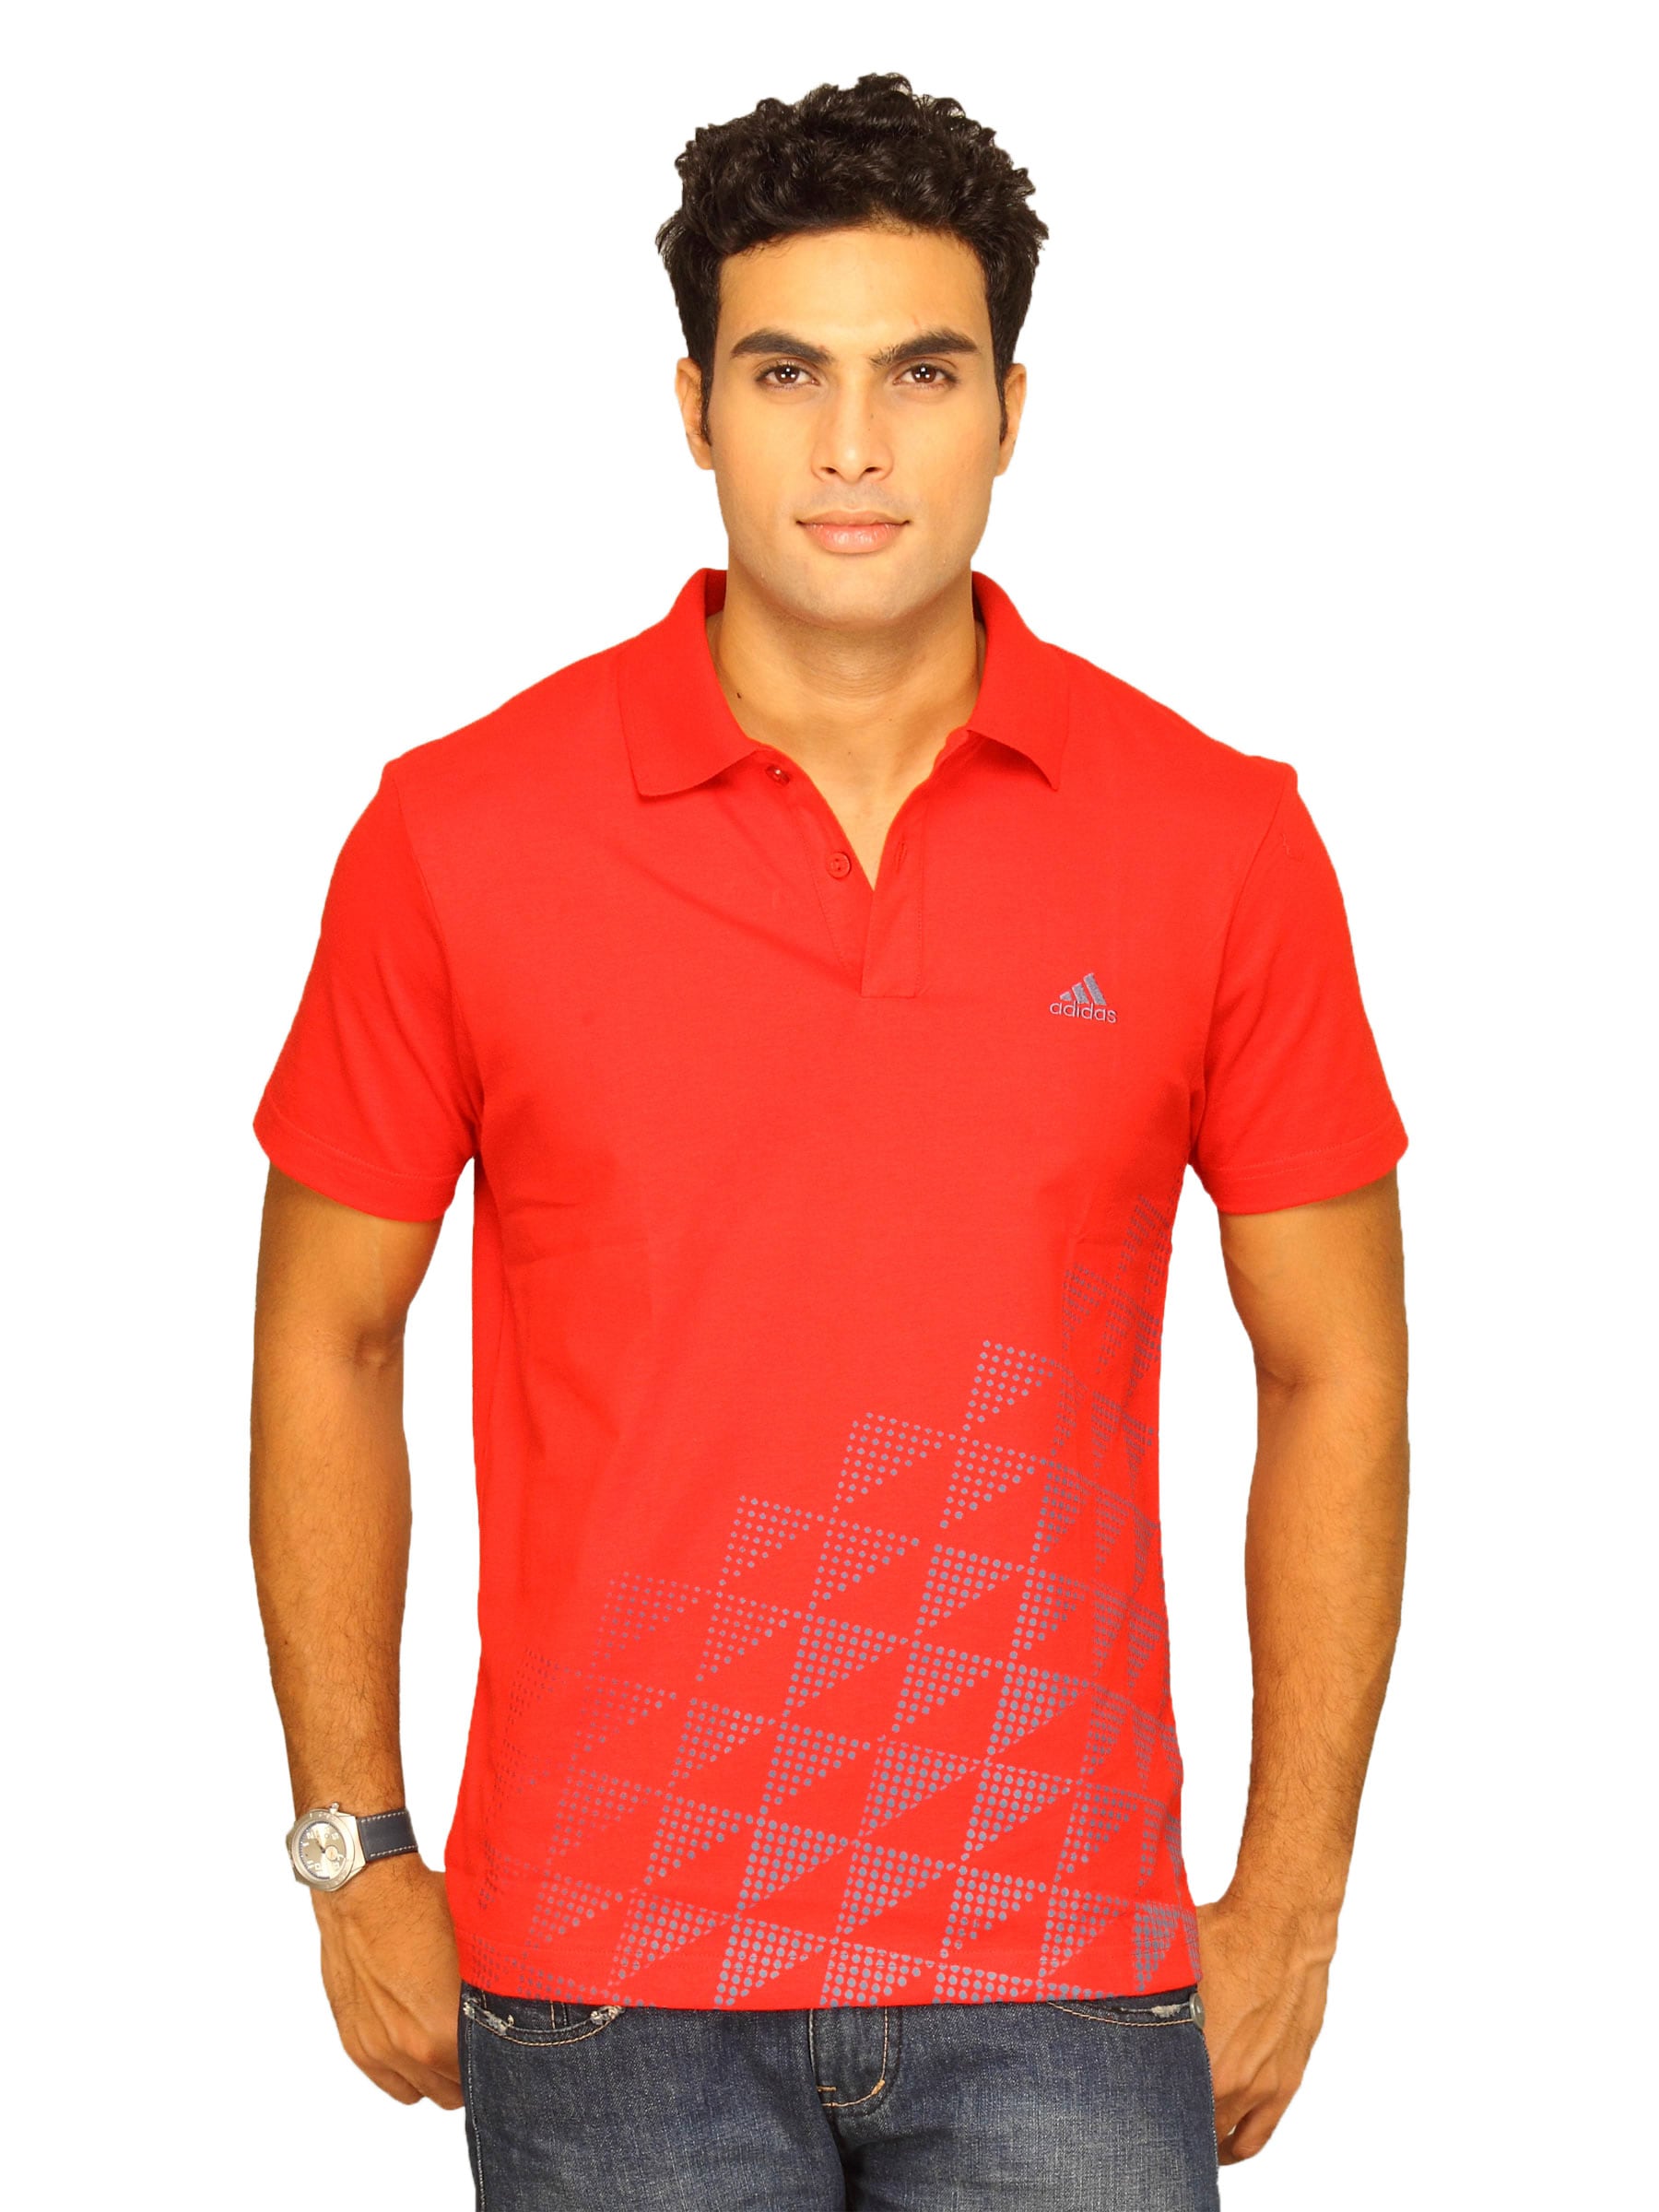 ADIDAS Men's Red Polo T-shirt